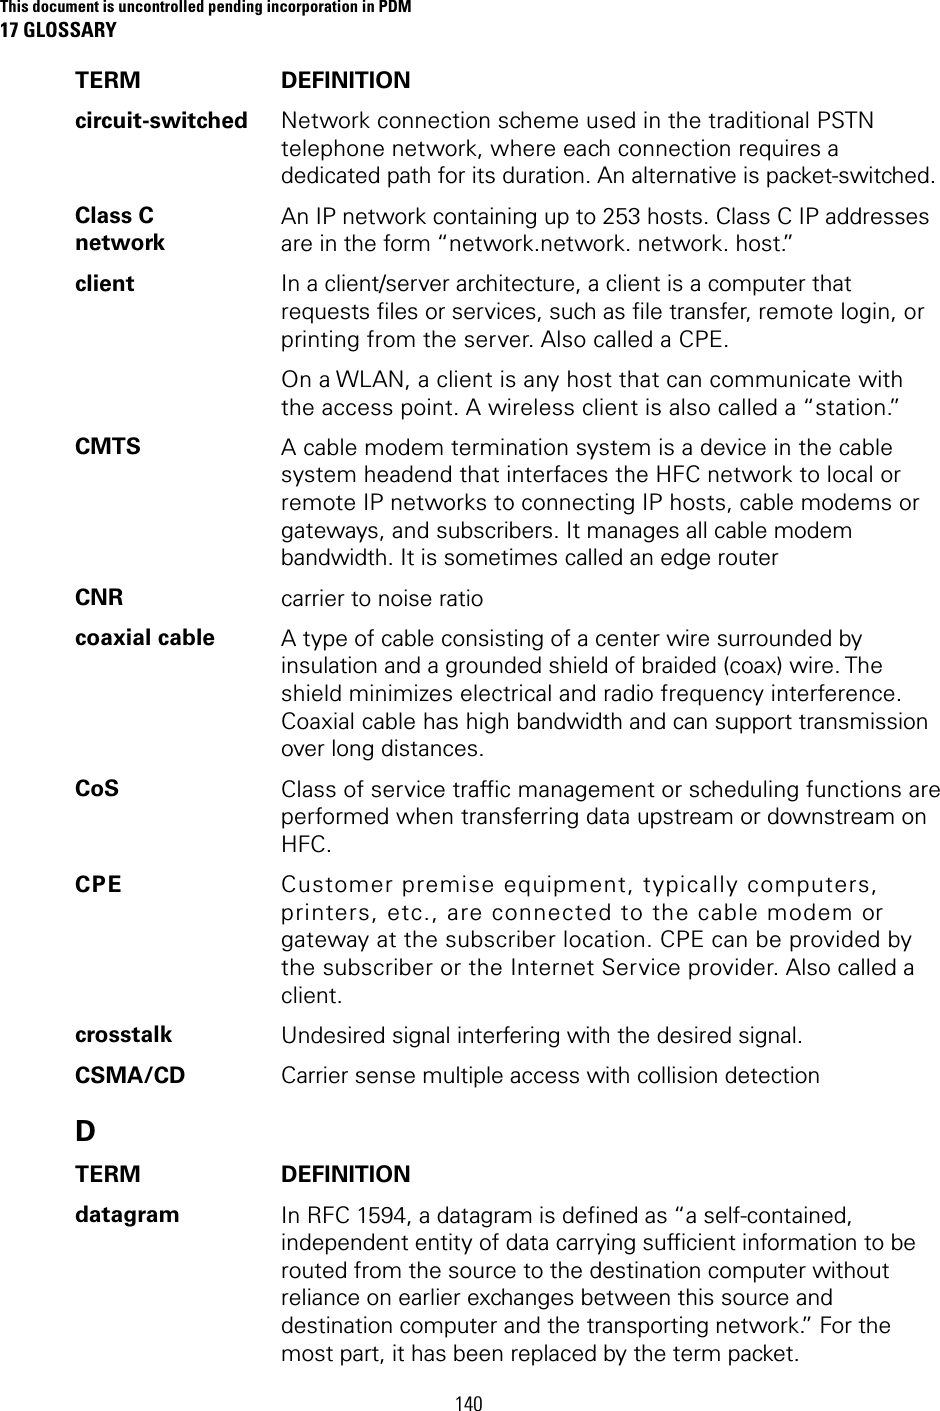 This document is uncontrolled pending incorporation in PDM 17 GLOSSARY 140 TERM DEFINITION circuit-switched  Network connection scheme used in the traditional PSTN telephone network, where each connection requires a dedicated path for its duration. An alternative is packet-switched. Class C network An IP network containing up to 253 hosts. Class C IP addresses are in the form “network.network. network. host.” client  In a client/server architecture, a client is a computer that requests files or services, such as file transfer, remote login, or printing from the server. Also called a CPE. On a WLAN, a client is any host that can communicate with the access point. A wireless client is also called a “station.” CMTS  A cable modem termination system is a device in the cable system headend that interfaces the HFC network to local or remote IP networks to connecting IP hosts, cable modems or gateways, and subscribers. It manages all cable modem bandwidth. It is sometimes called an edge router CNR  carrier to noise ratio coaxial cable  A type of cable consisting of a center wire surrounded by insulation and a grounded shield of braided (coax) wire. The shield minimizes electrical and radio frequency interference. Coaxial cable has high bandwidth and can support transmission over long distances. CoS  Class of service traffic management or scheduling functions are performed when transferring data upstream or downstream on HFC. CPE  Customer premise equipment, typically computers, printers, etc., are connected to the cable modem or gateway at the subscriber location. CPE can be provided by the subscriber or the Internet Service provider. Also called a client. crosstalk  Undesired signal interfering with the desired signal. CSMA/CD  Carrier sense multiple access with collision detection D TERM DEFINITION datagram  In RFC 1594, a datagram is defined as “a self-contained, independent entity of data carrying sufficient information to be routed from the source to the destination computer without reliance on earlier exchanges between this source and destination computer and the transporting network.” For the most part, it has been replaced by the term packet. 